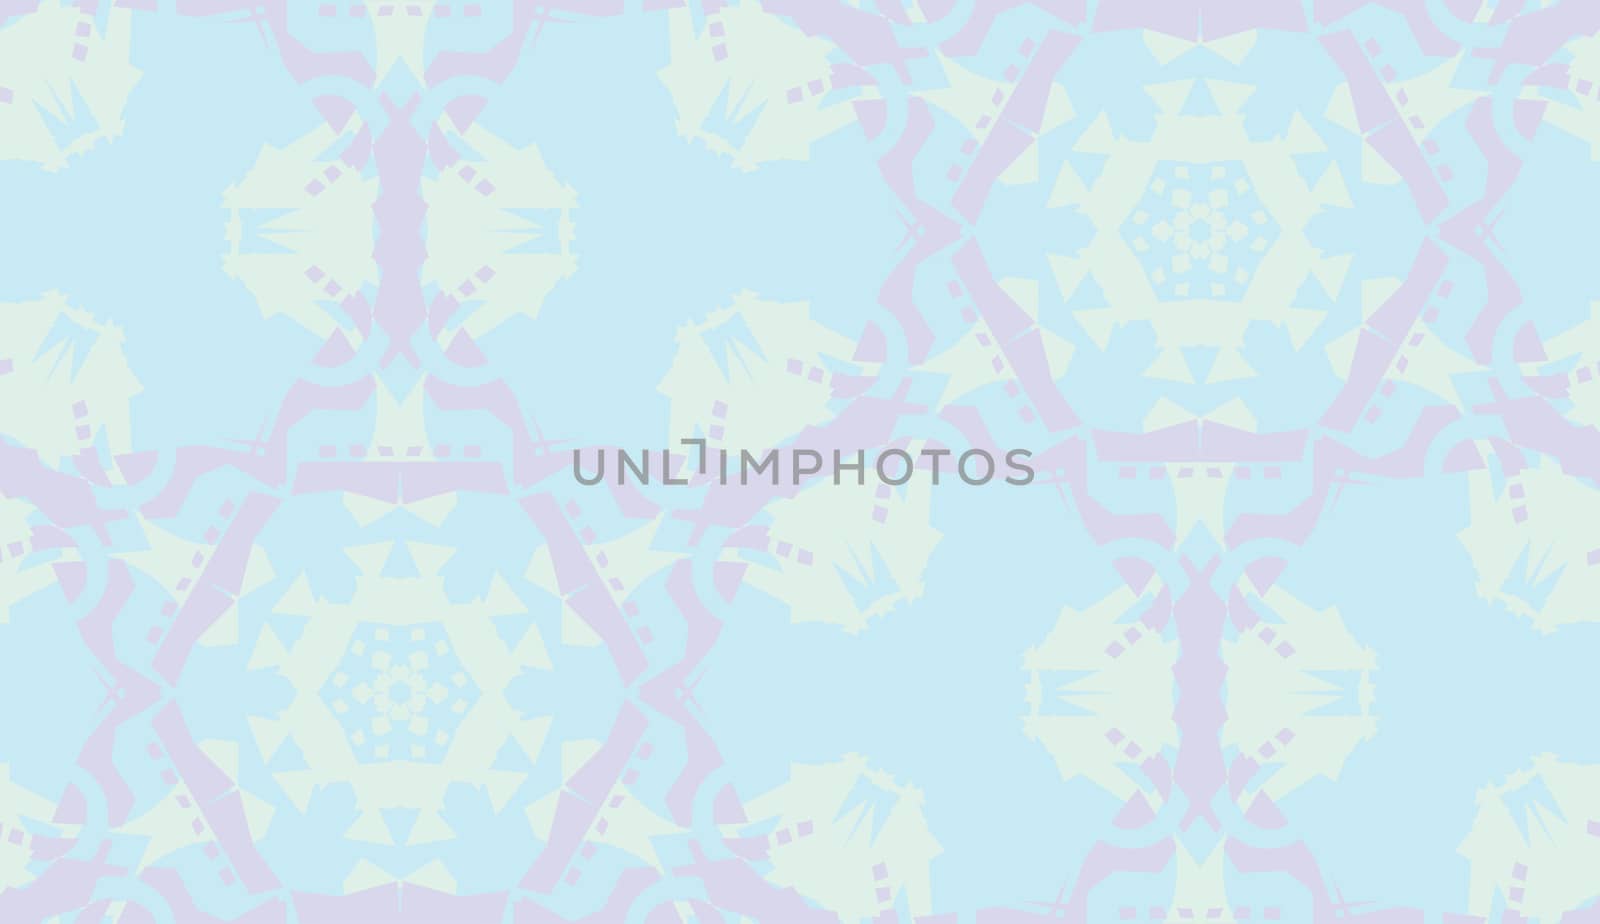 Seamless blue and purple doily background pattern